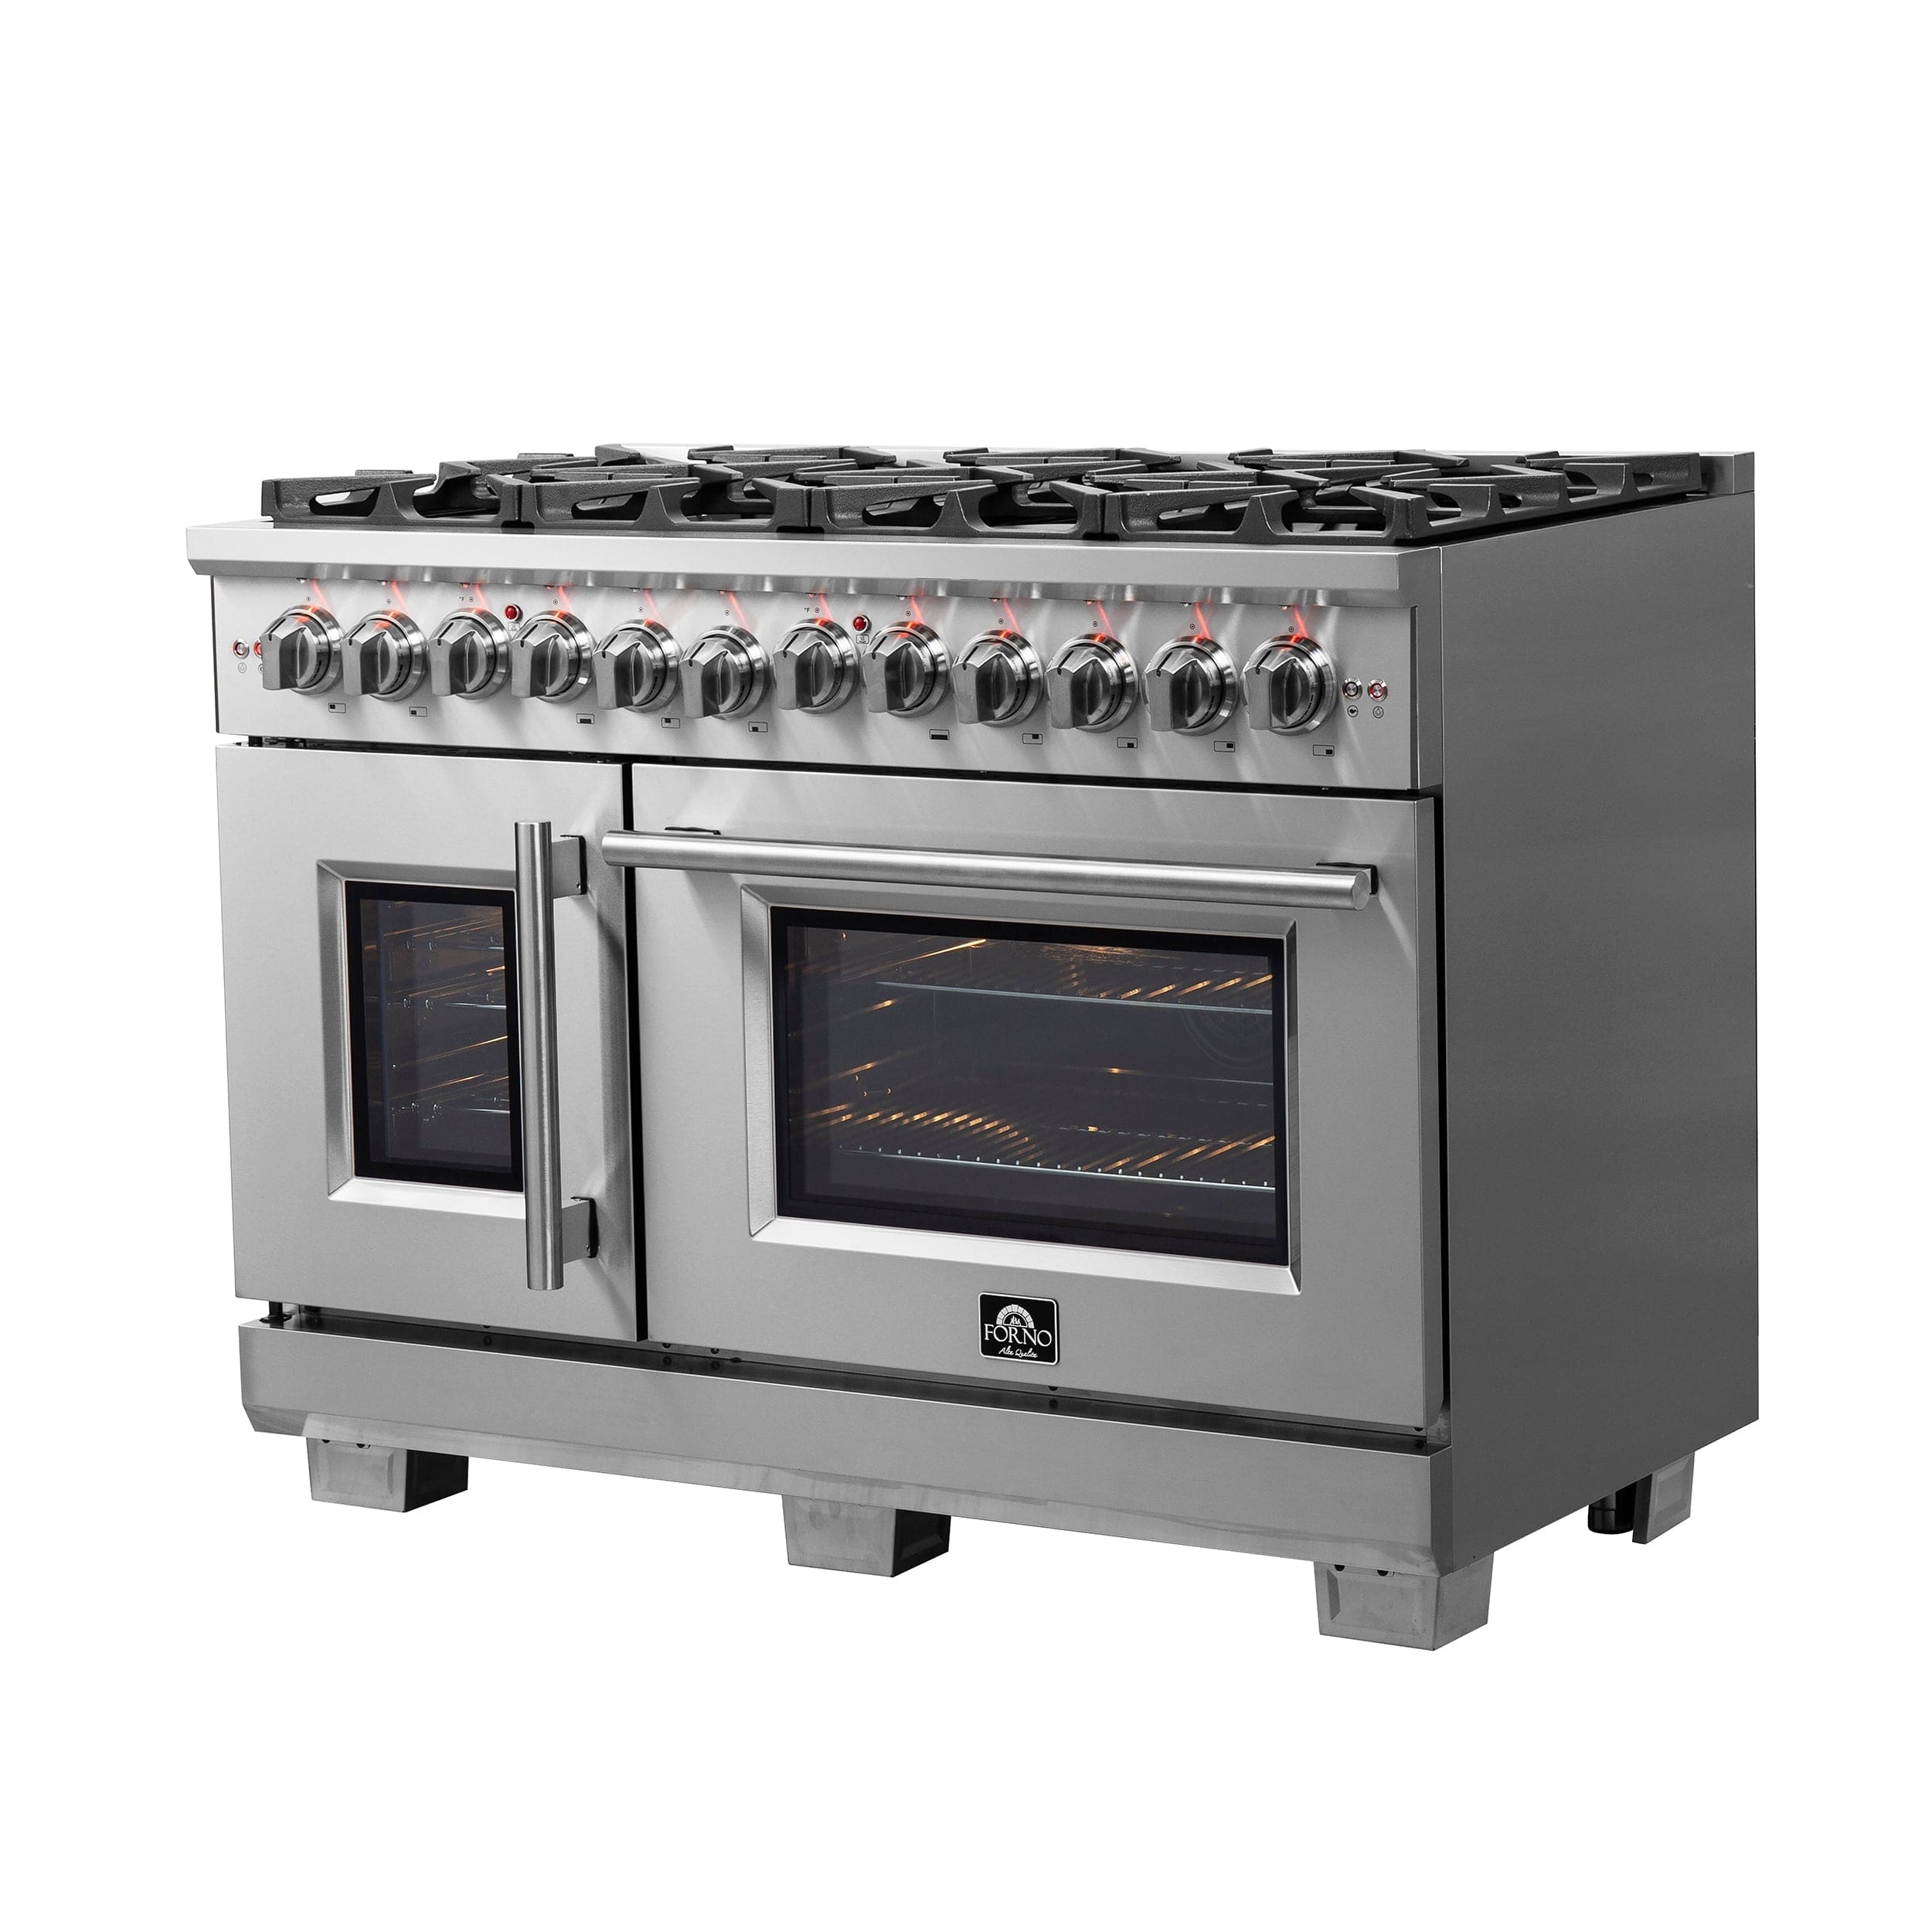 Forno Capriasca 48" Professional Gas Burner, Electric Oven Range With French Door And 8 Sealed Burners, FFSGS6387-48 Ranges FFSGS6387-48 Luxury Appliances Direct